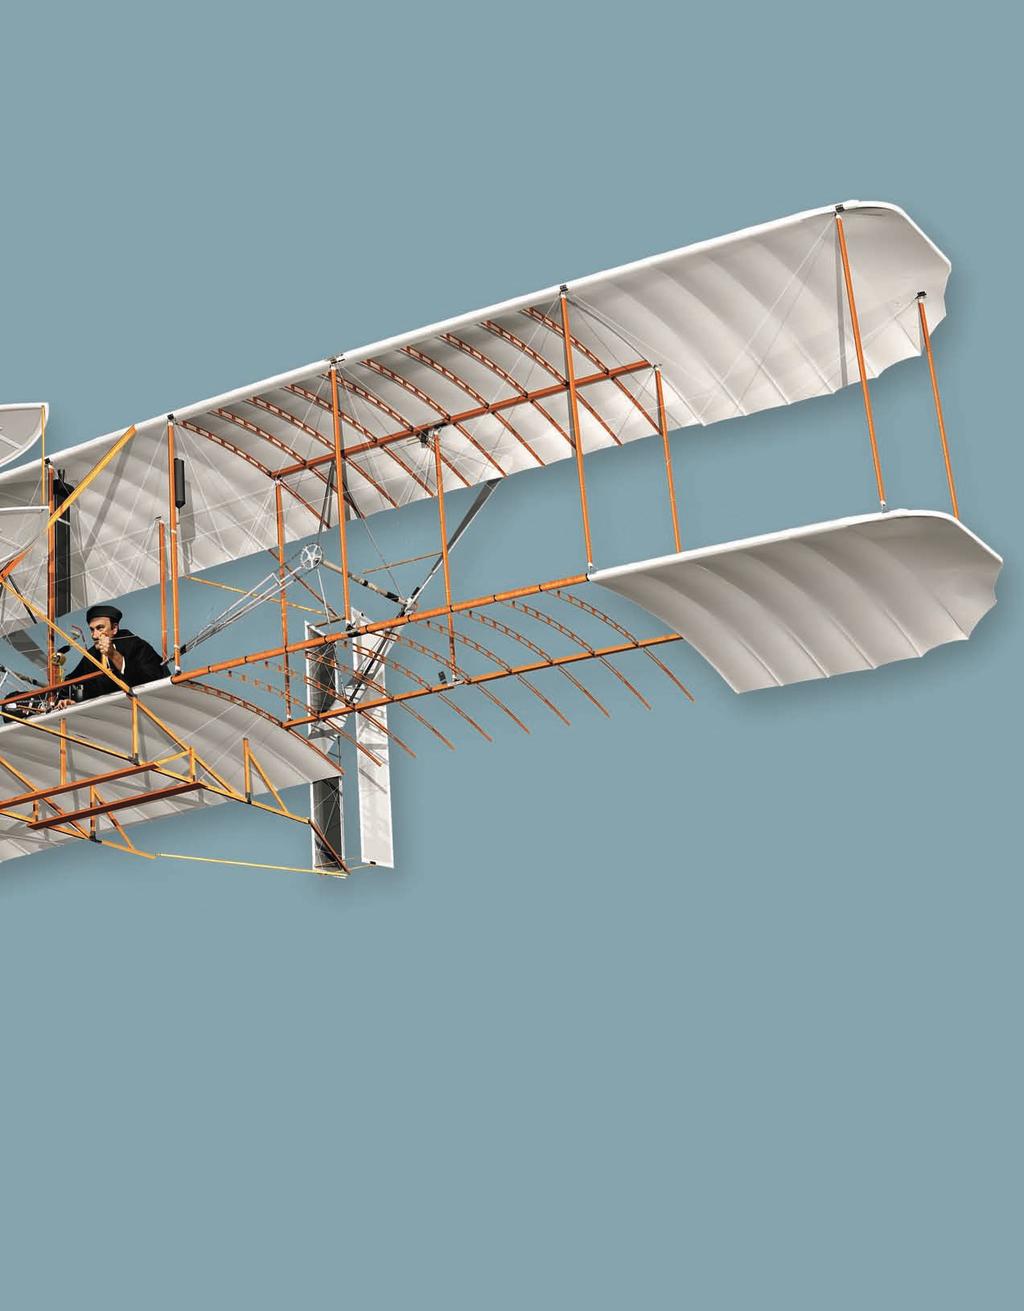 Orville Wright made the first powered airplane flight